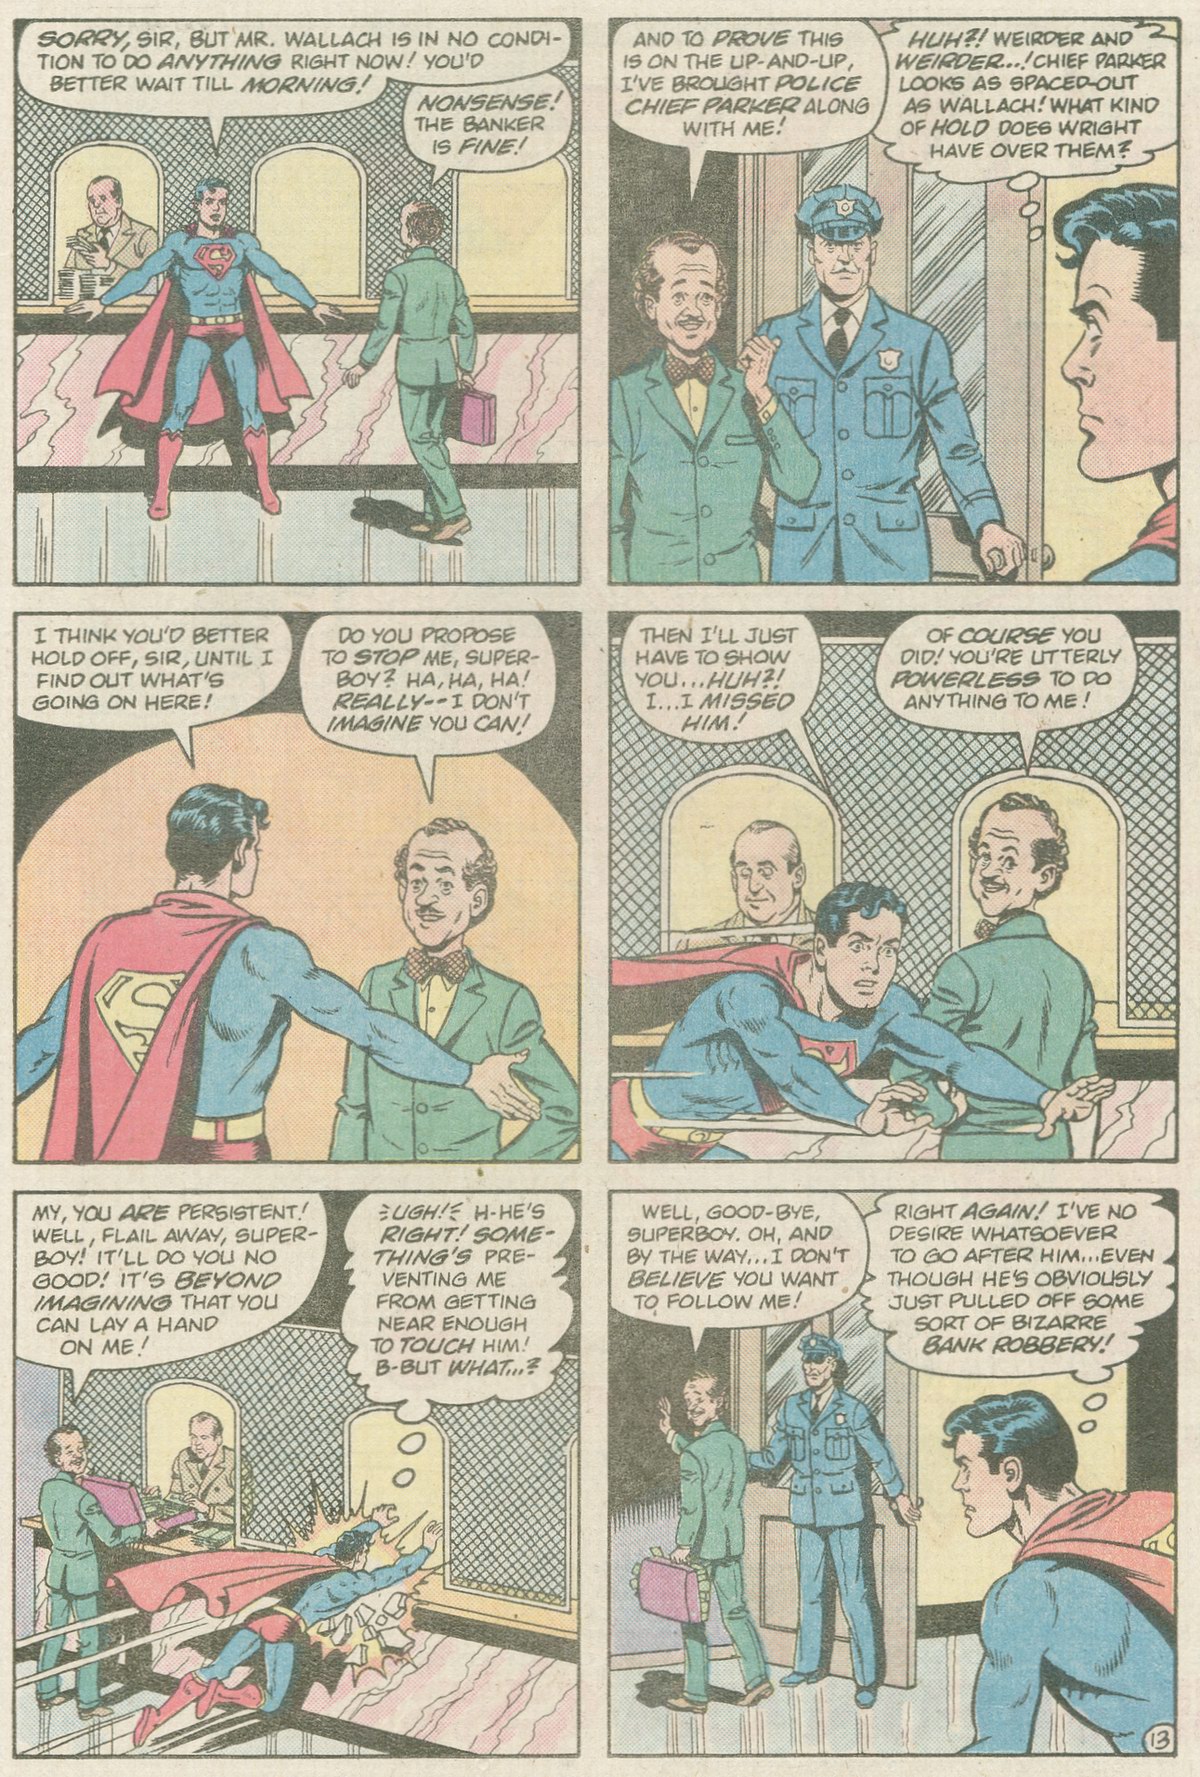 The New Adventures of Superboy 36 Page 13